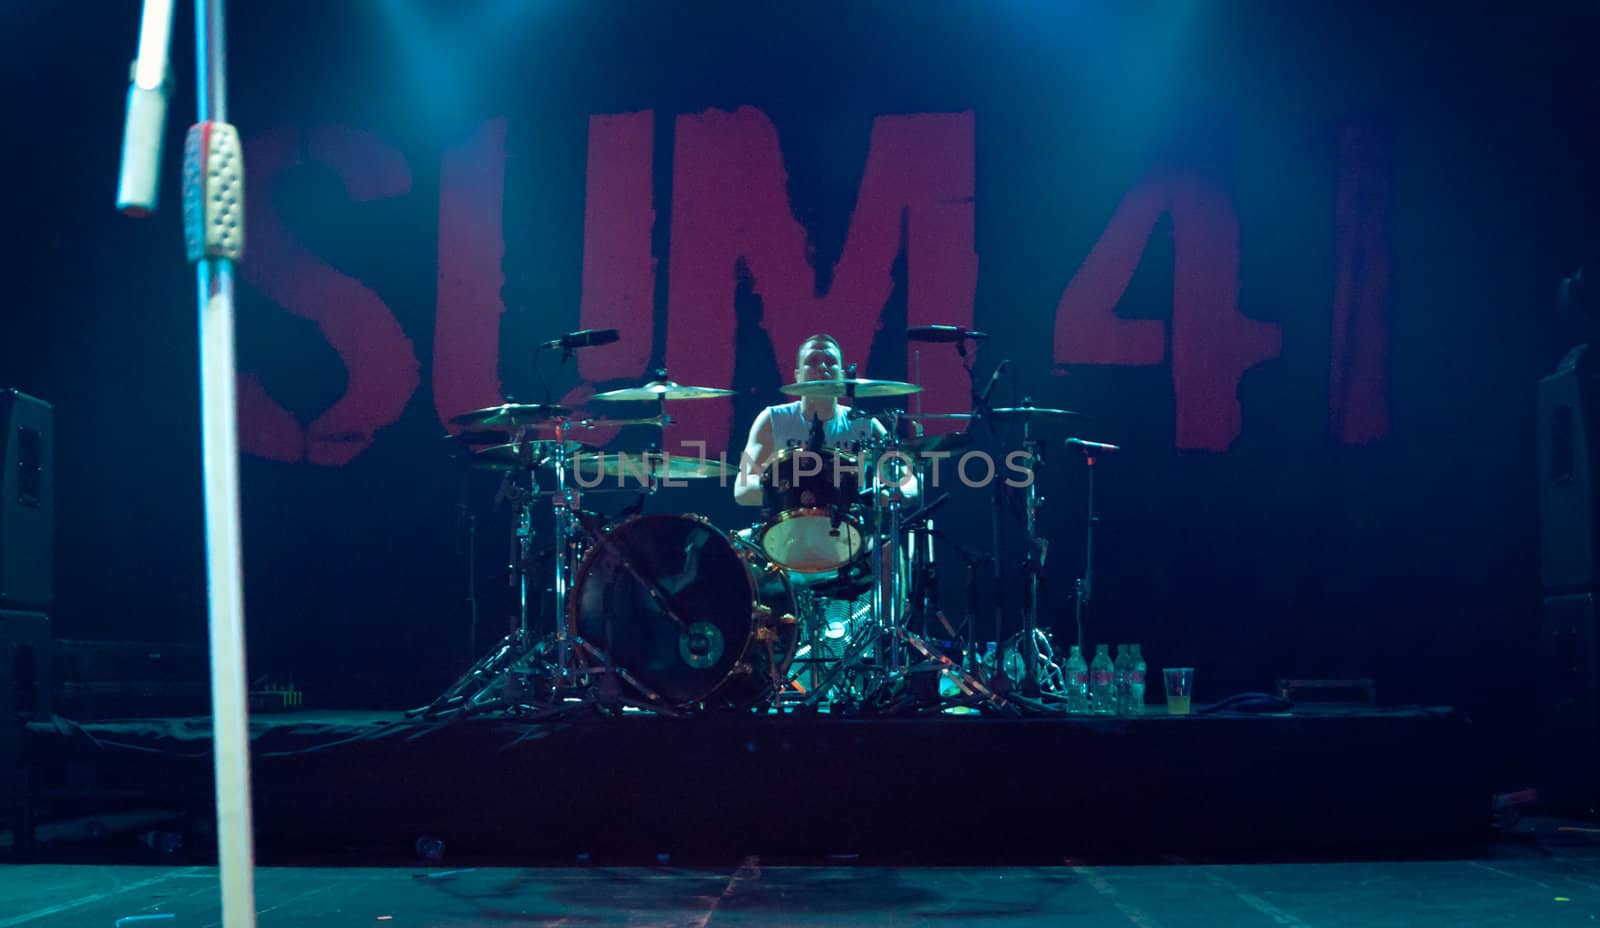 Steve Jocz. Sum 41 concert at Arena Moscow. 
Jul 25, 2012 - Arena Moscow, Moscow, Russia